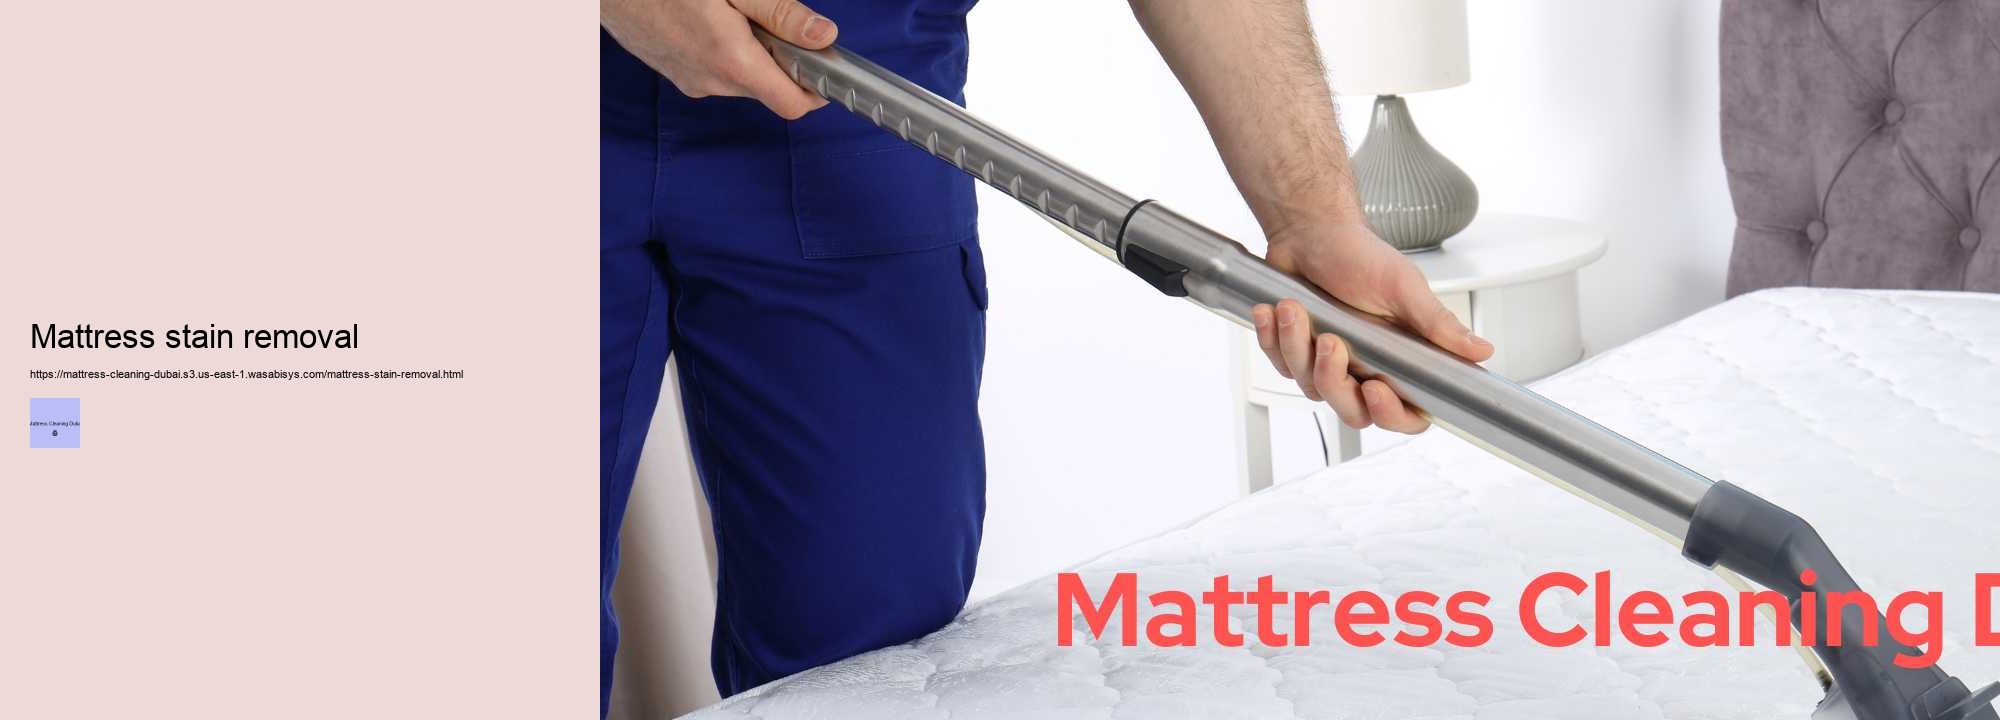 Mattress stain removal